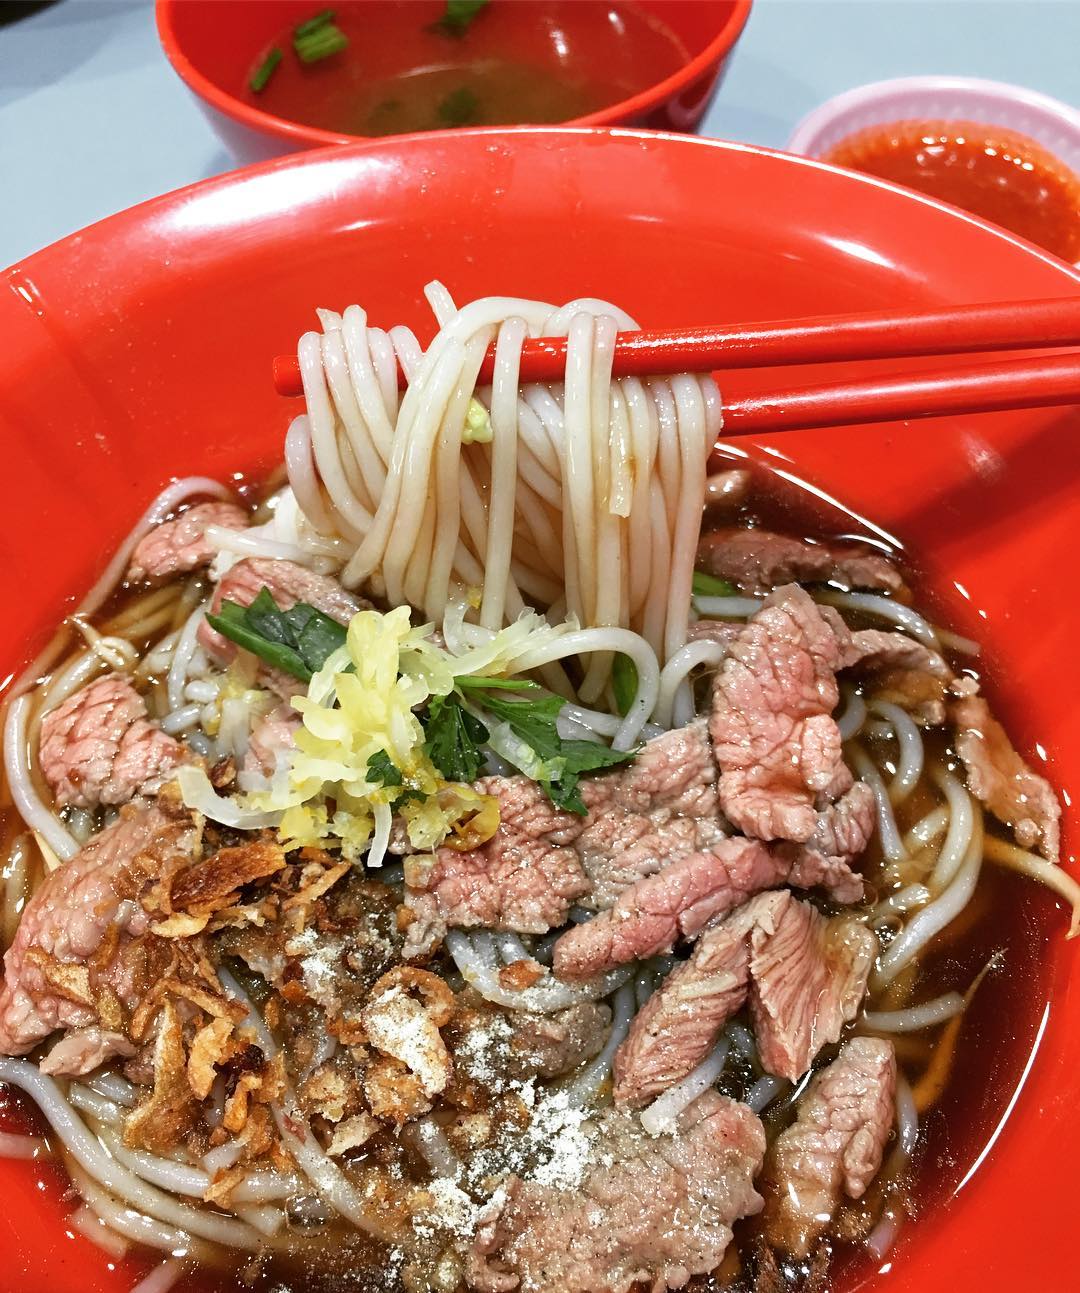 amoy street food centre- hong kee beef noodles